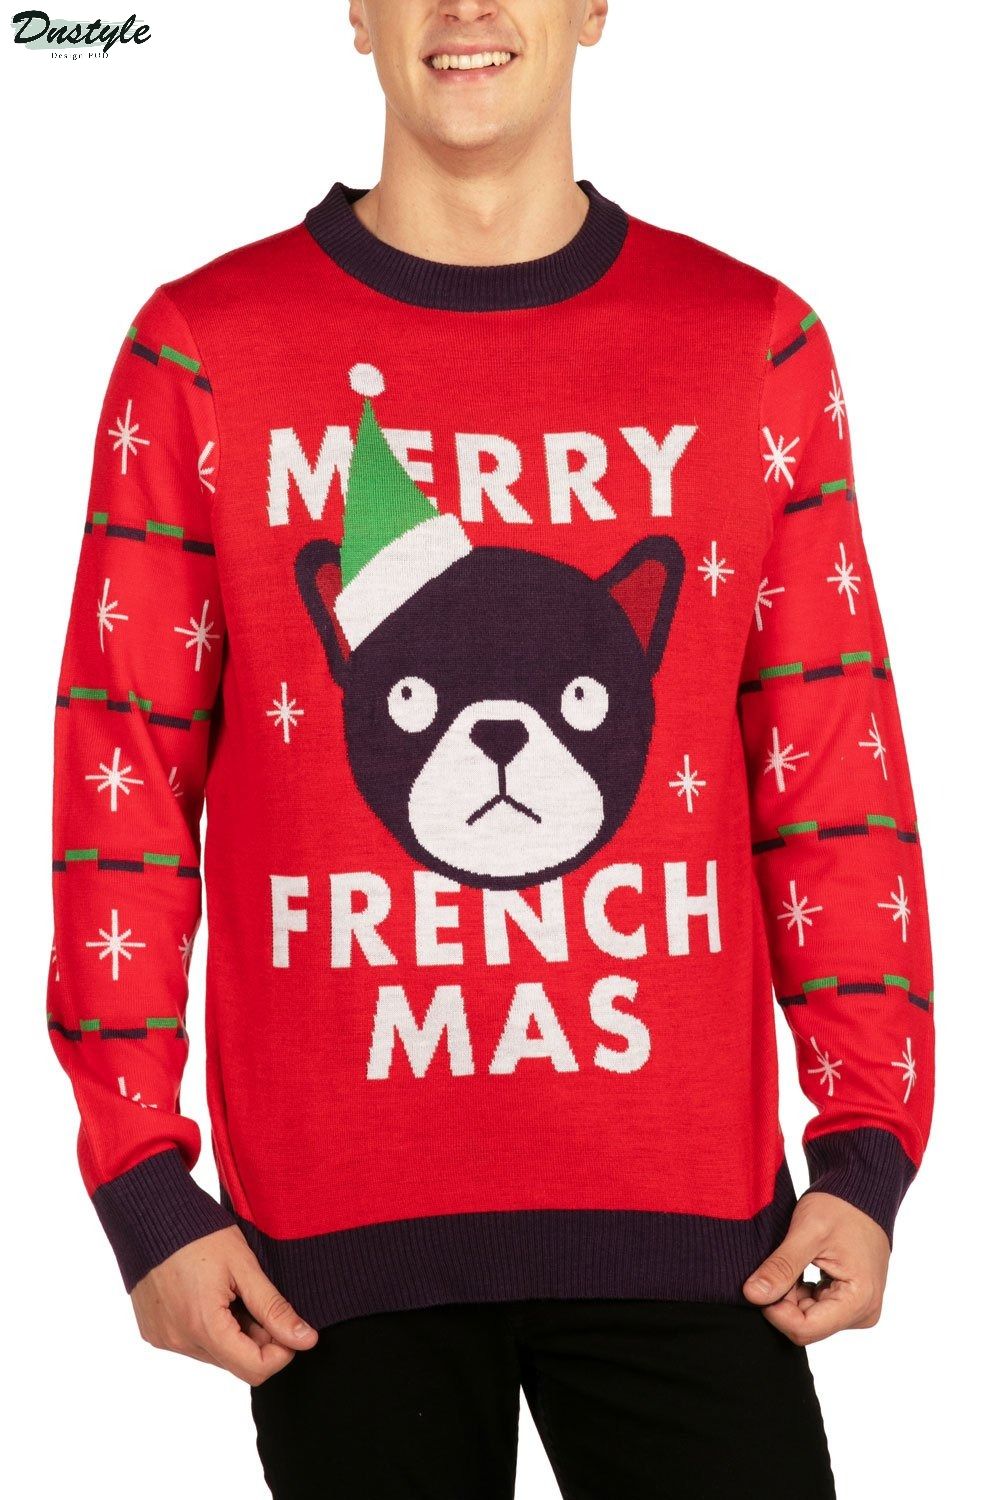 Merry Frenchmas Ugly Christmas Sweater